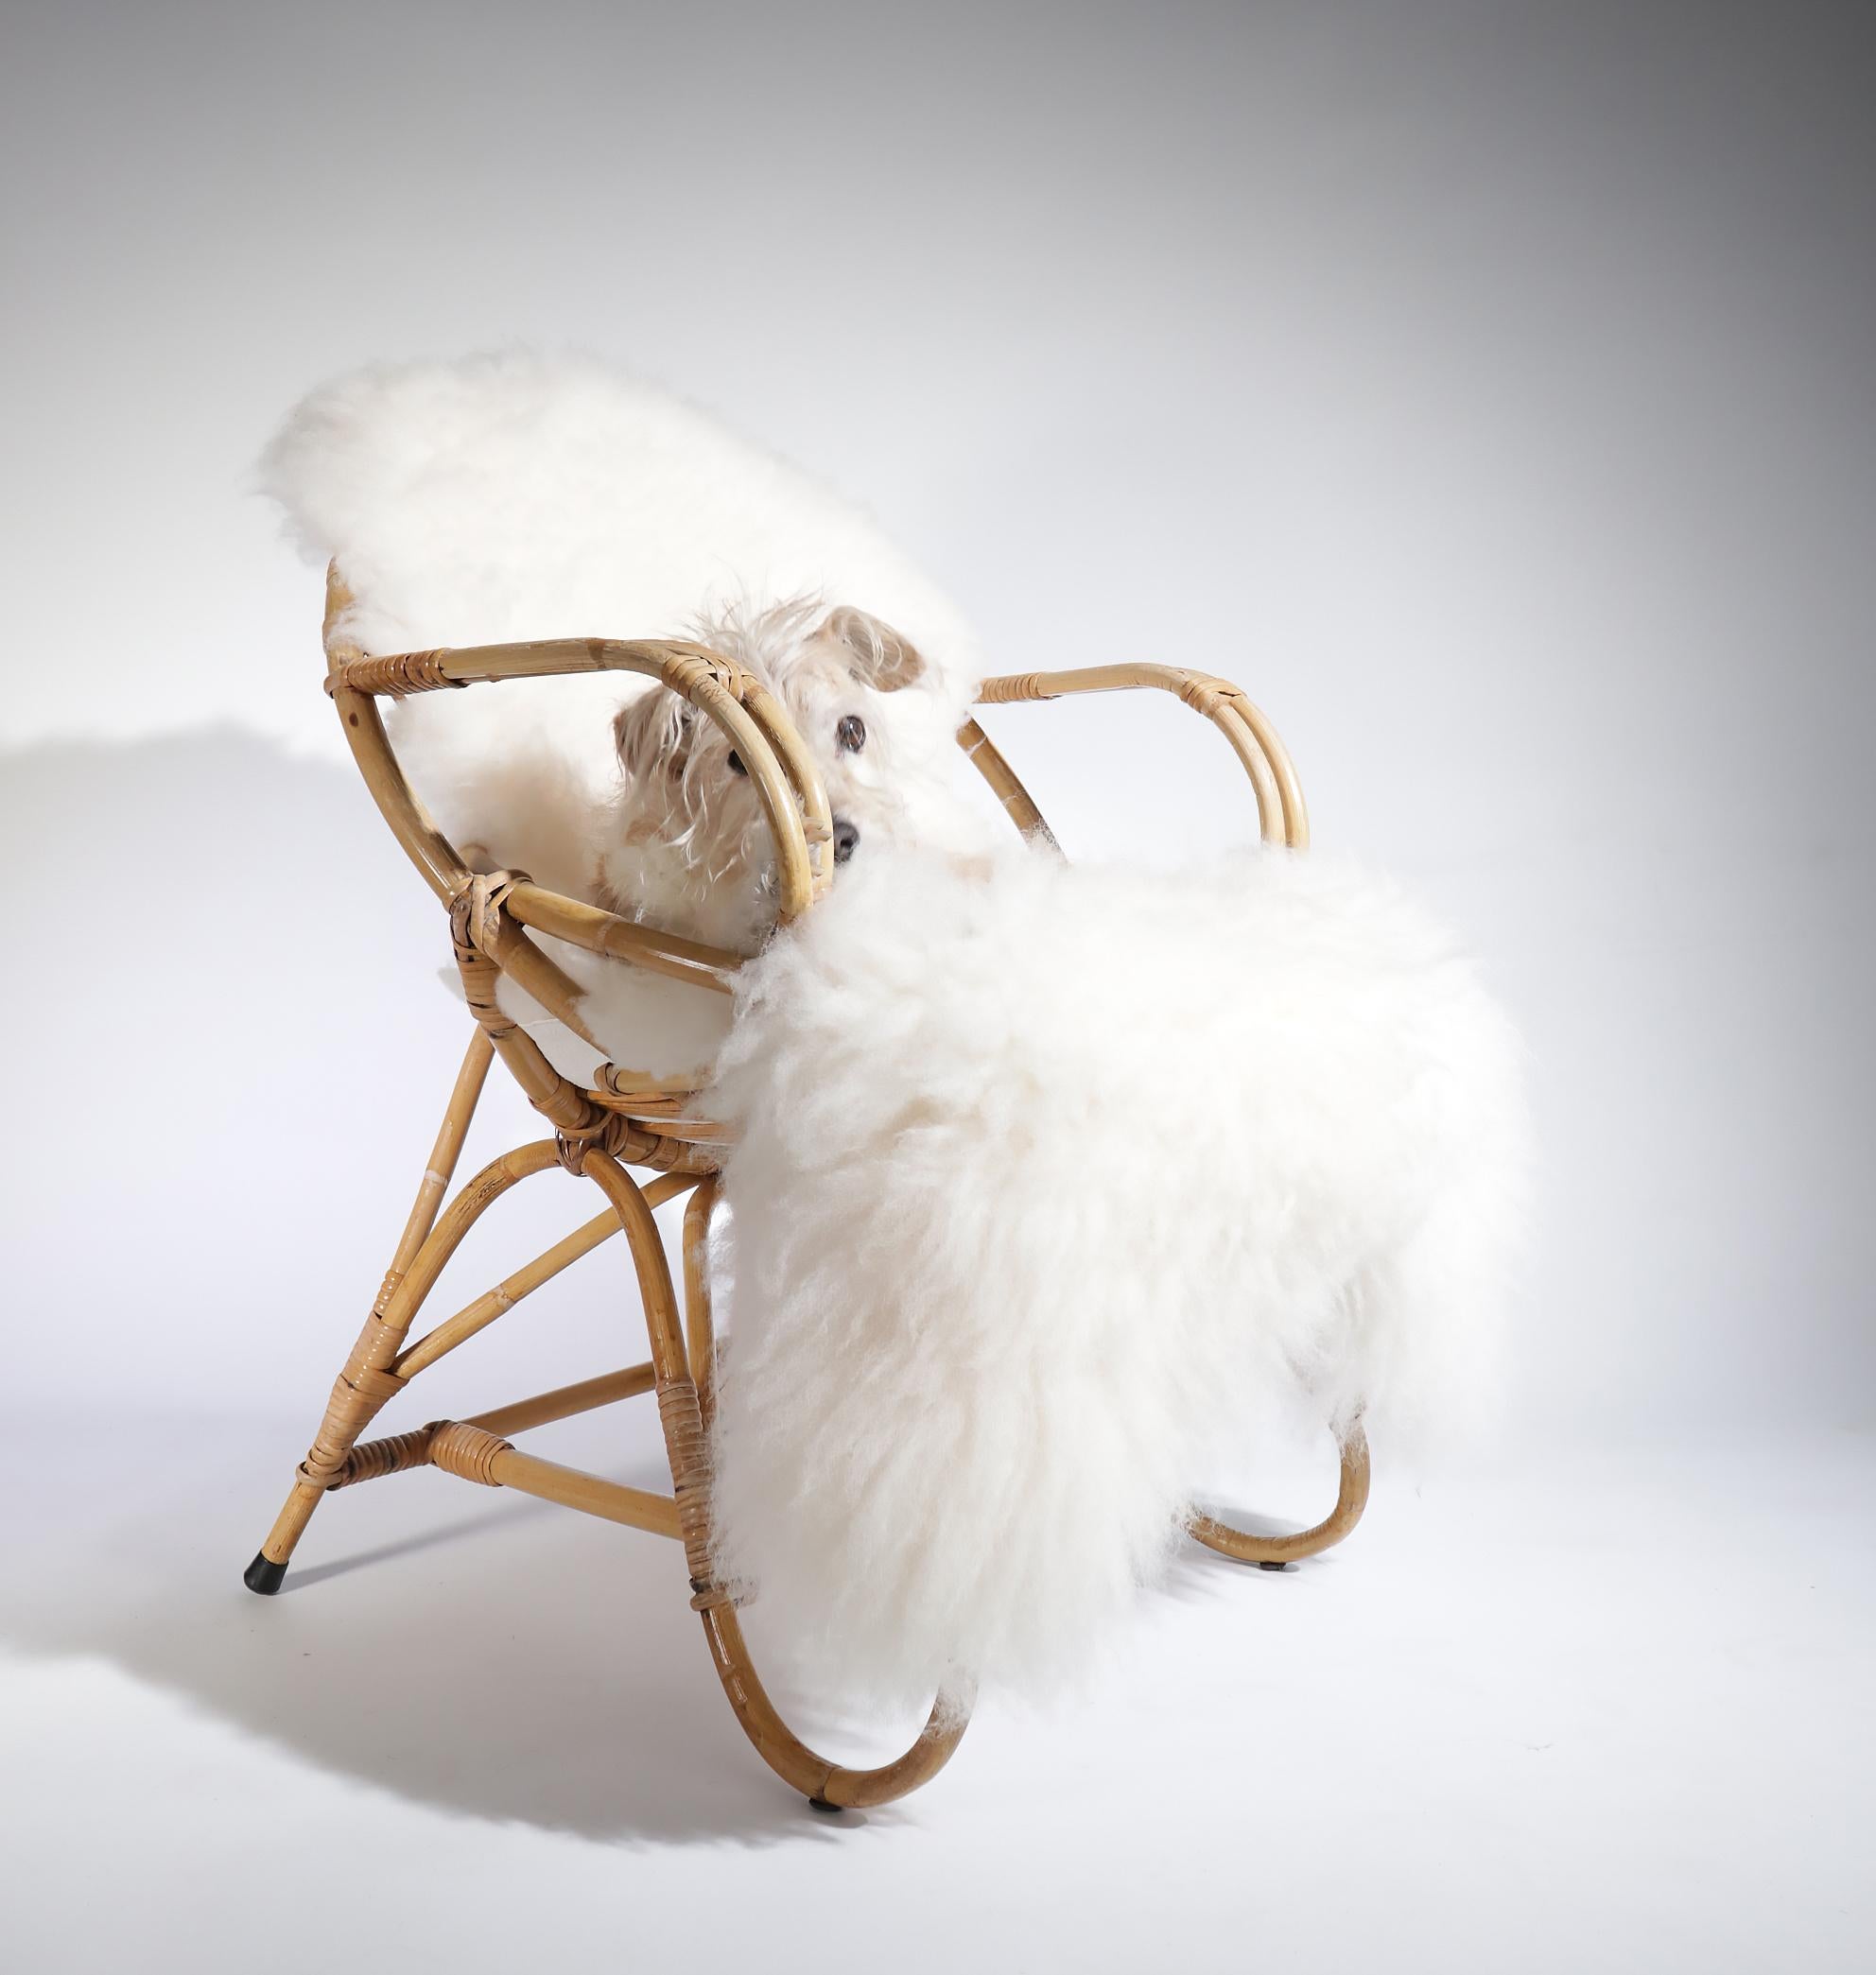 Vintage Dutch design lounge chair by Rohe Noordwolde from the 1960s.
Comes with a new white sheepskin.  
 